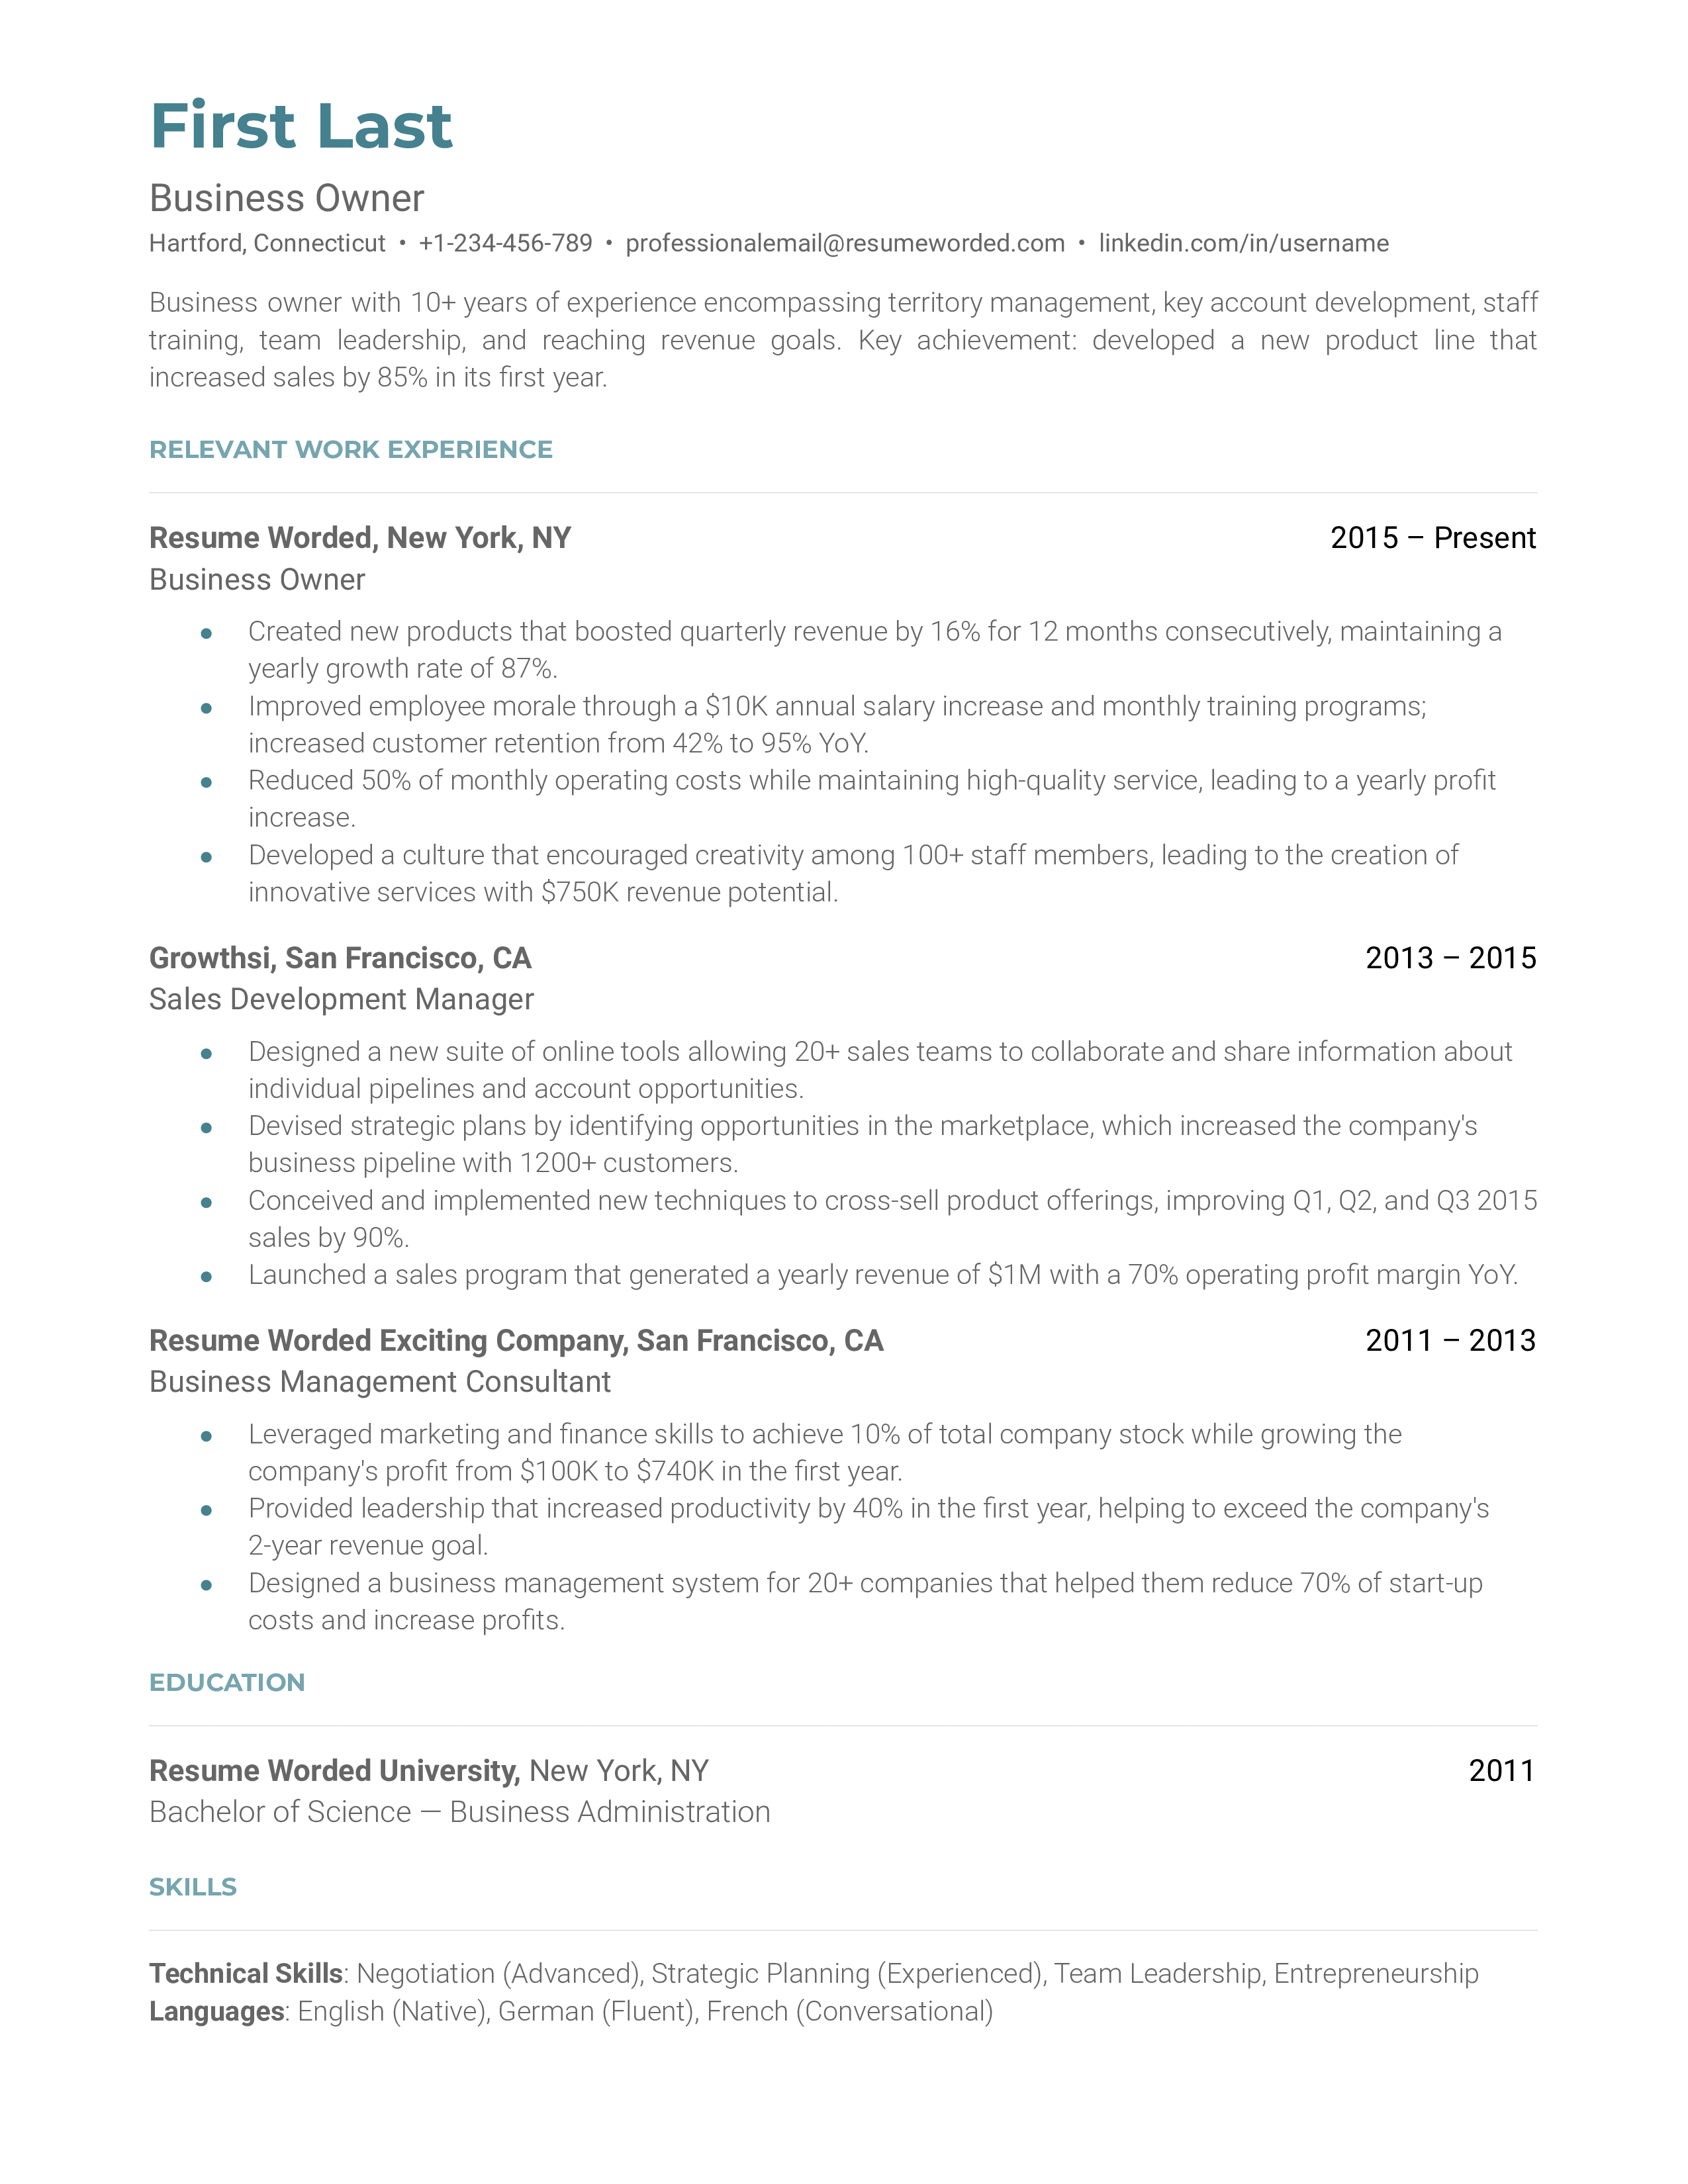 A business owner resume template including a brief description, work history, education, and skills. 